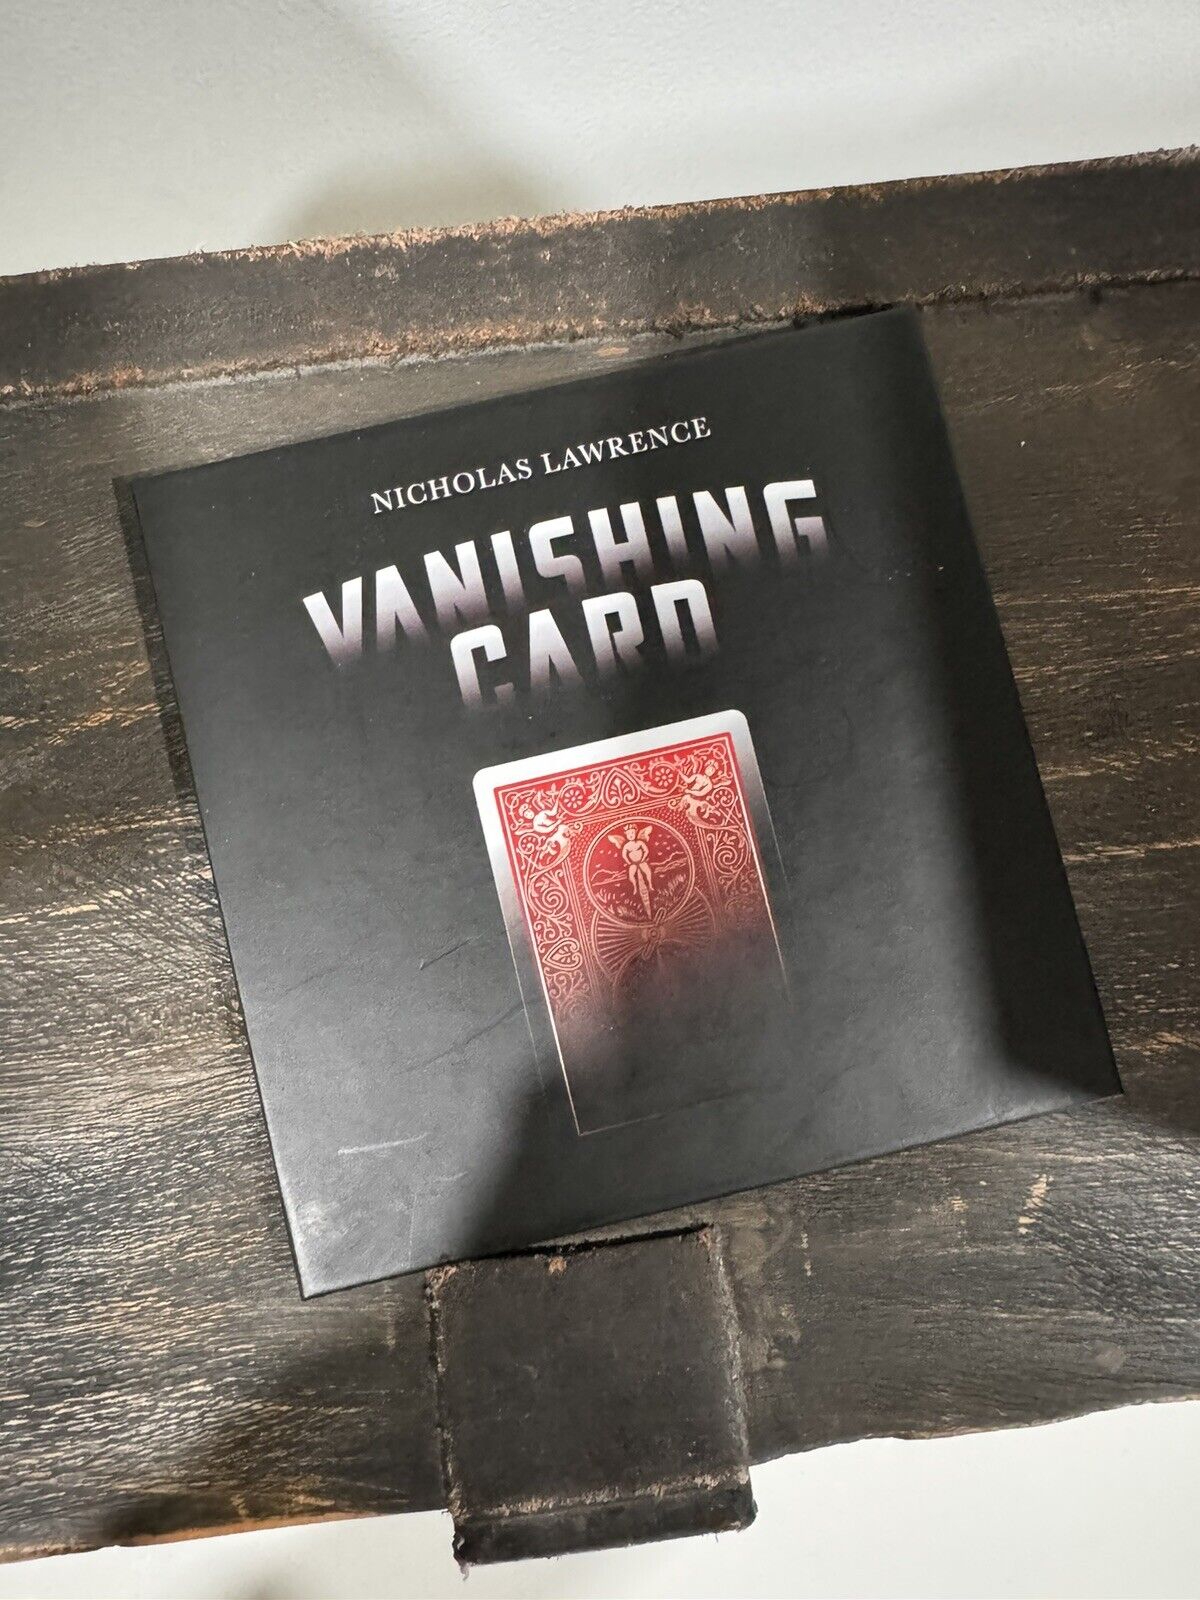 The Vanishing Card by Nicholas Lawrence - Trick